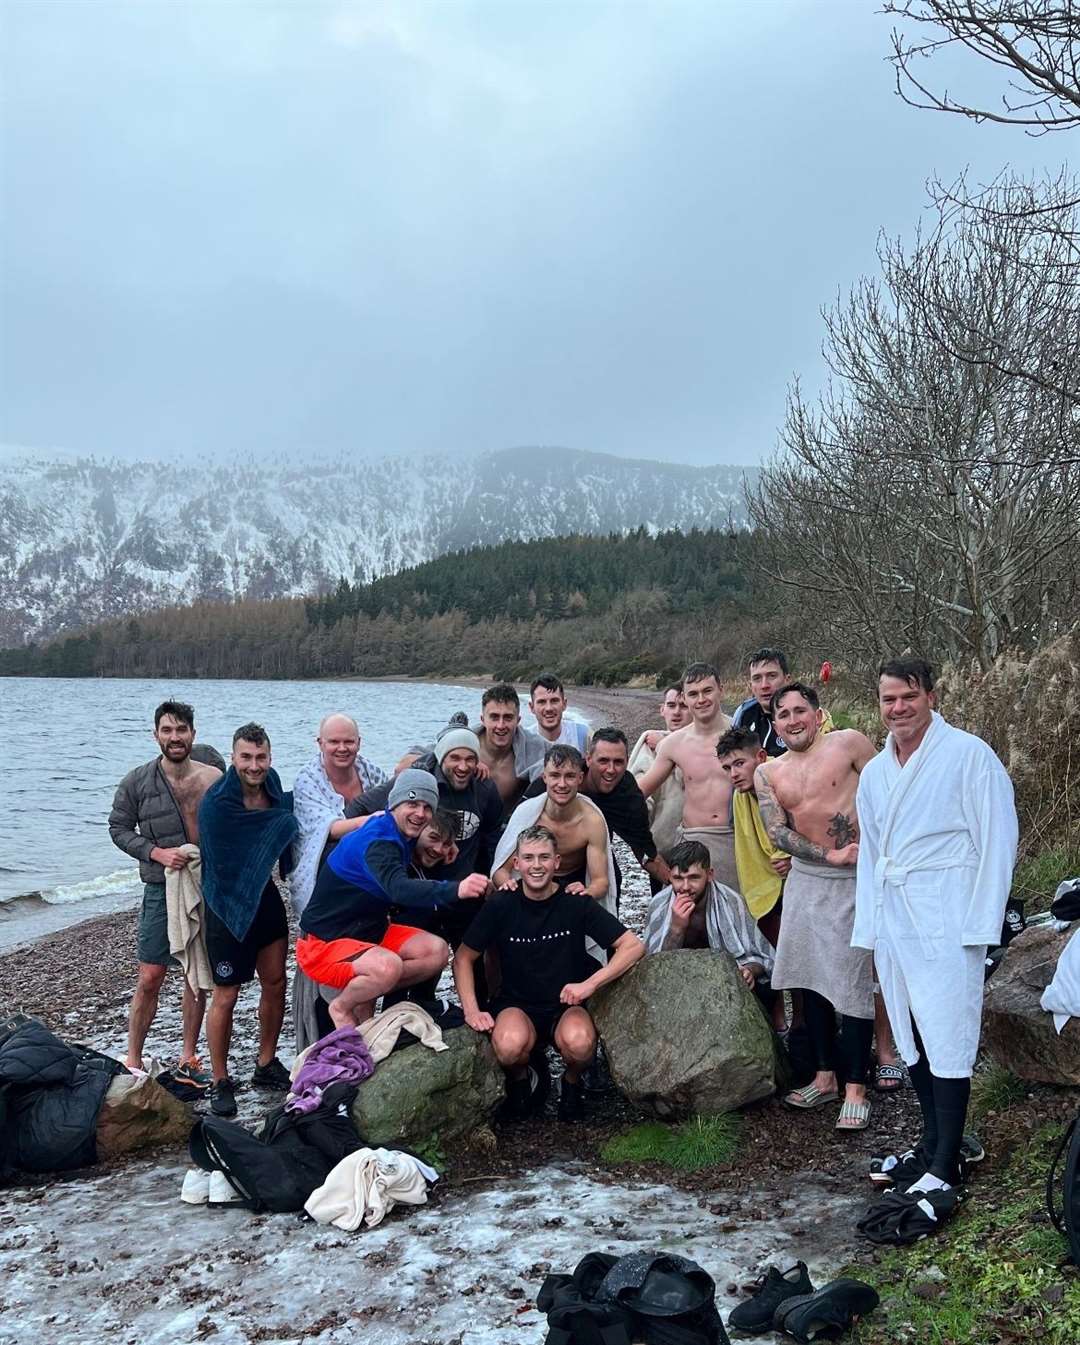 Nairn County players enjoyed a dip in Loch Ness